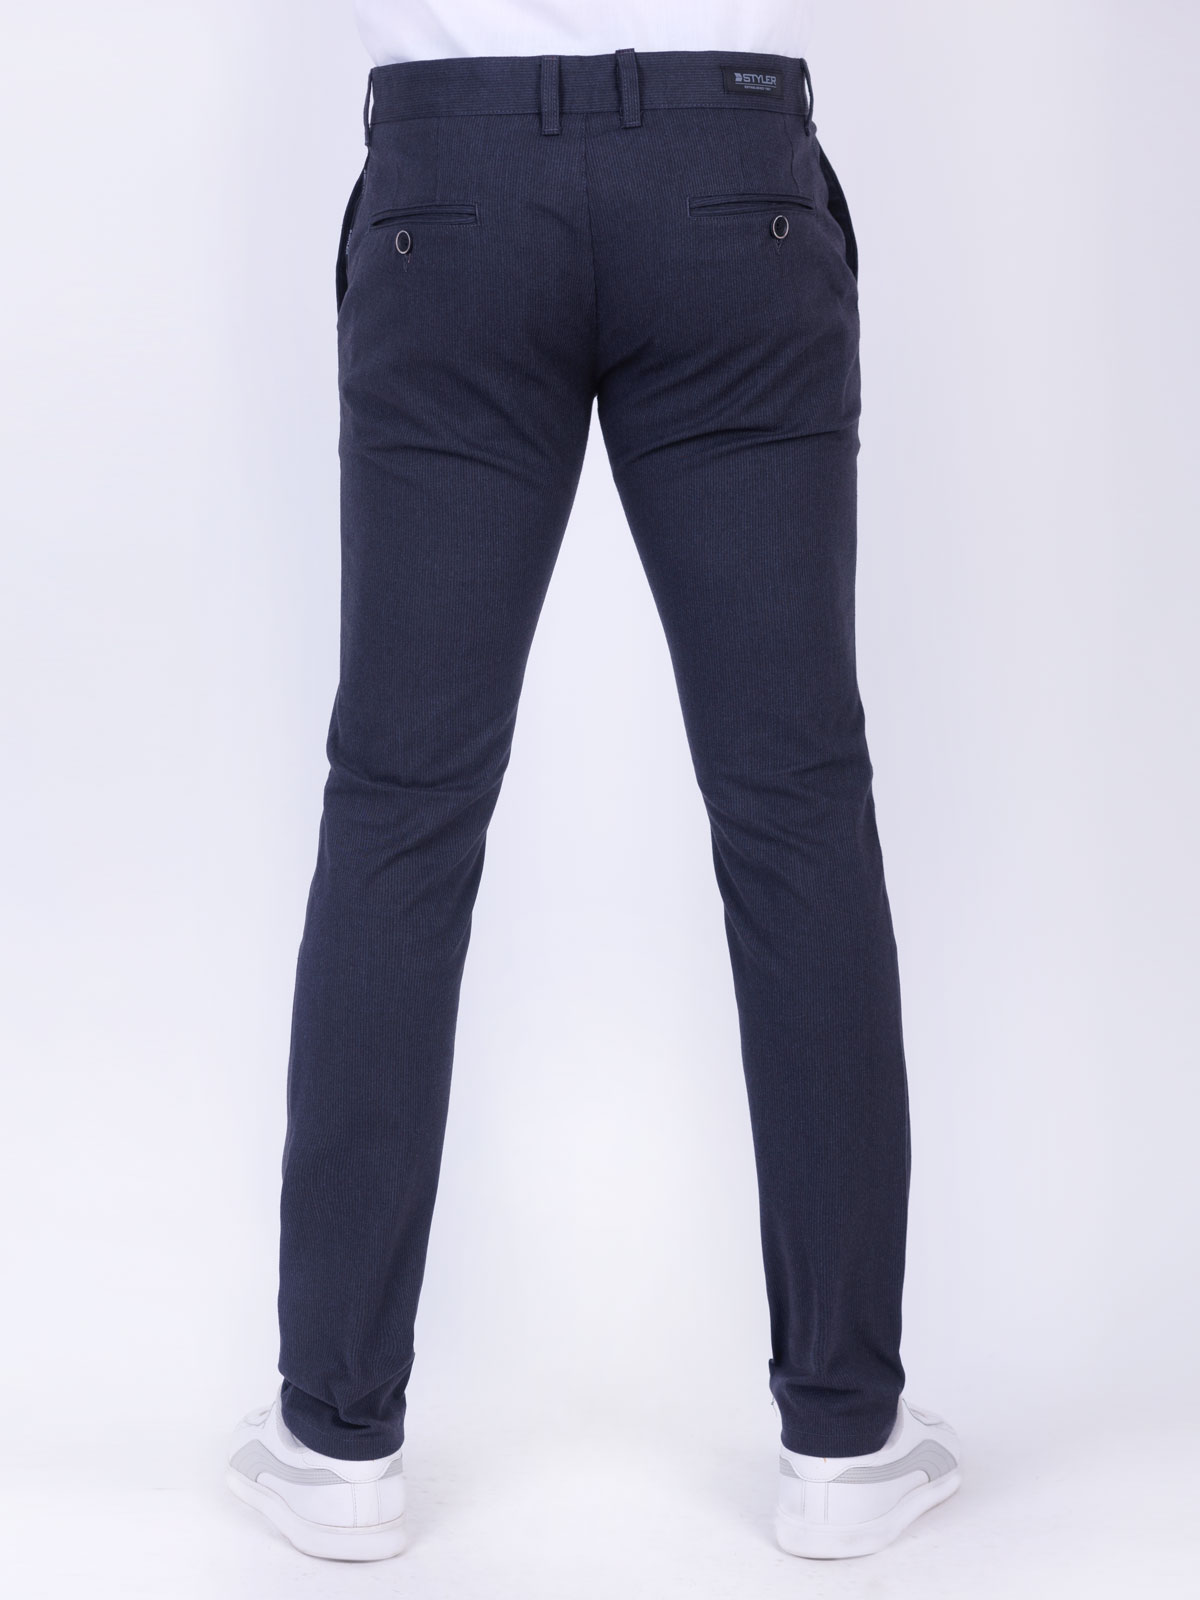 Pants in graphite gray - 60294 € 66.37 img2